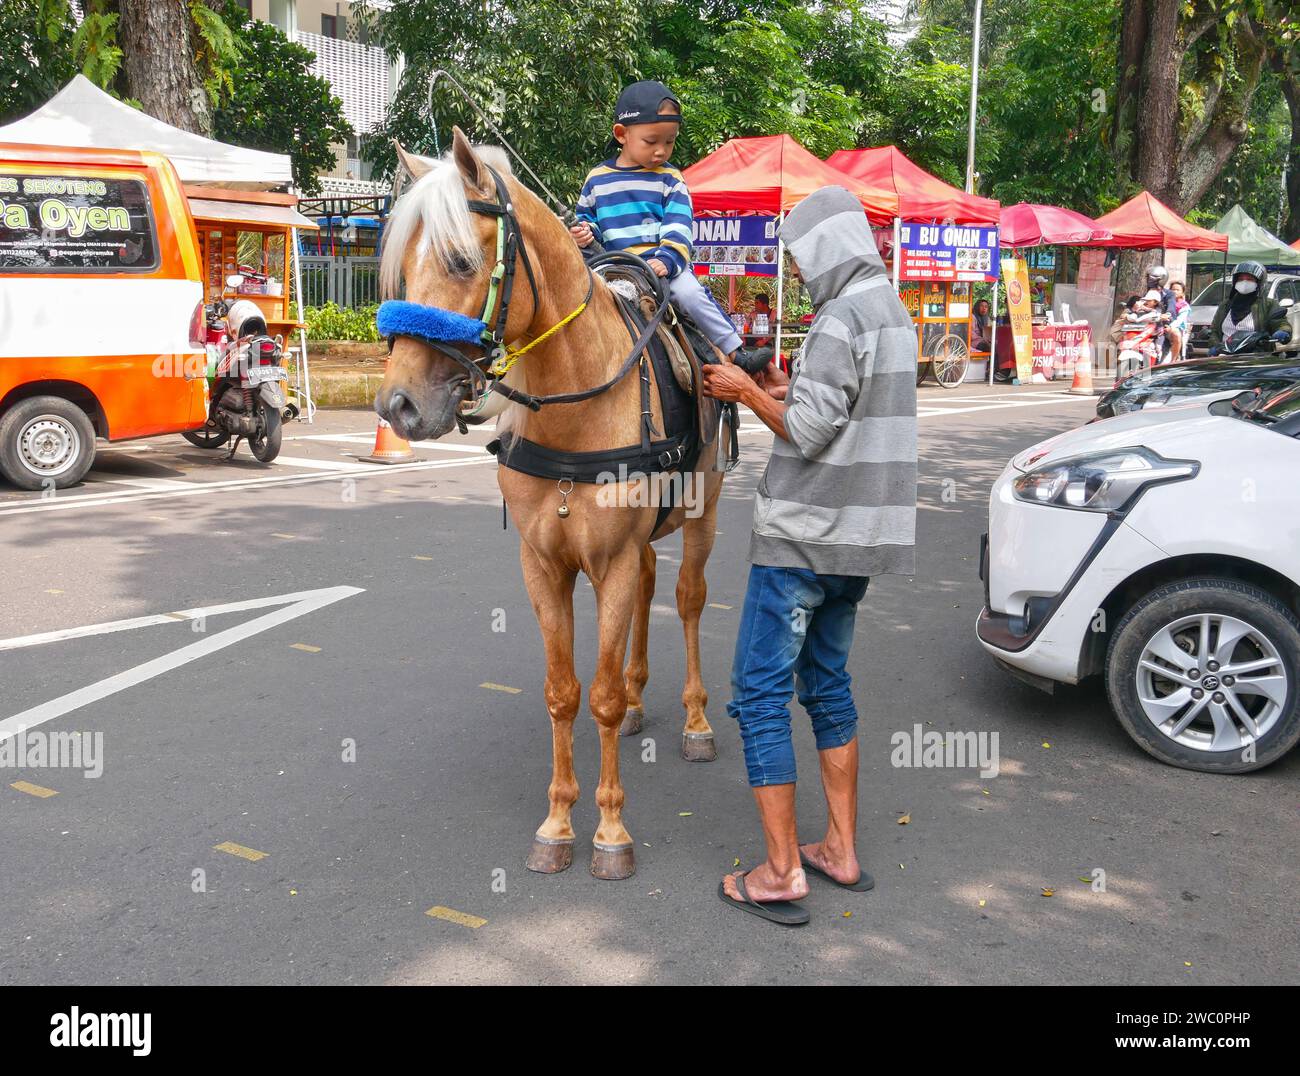 young boy preparing to ride a horse while a man holds the horse, in Bandung, West Java, Indonesia. Stock Photo